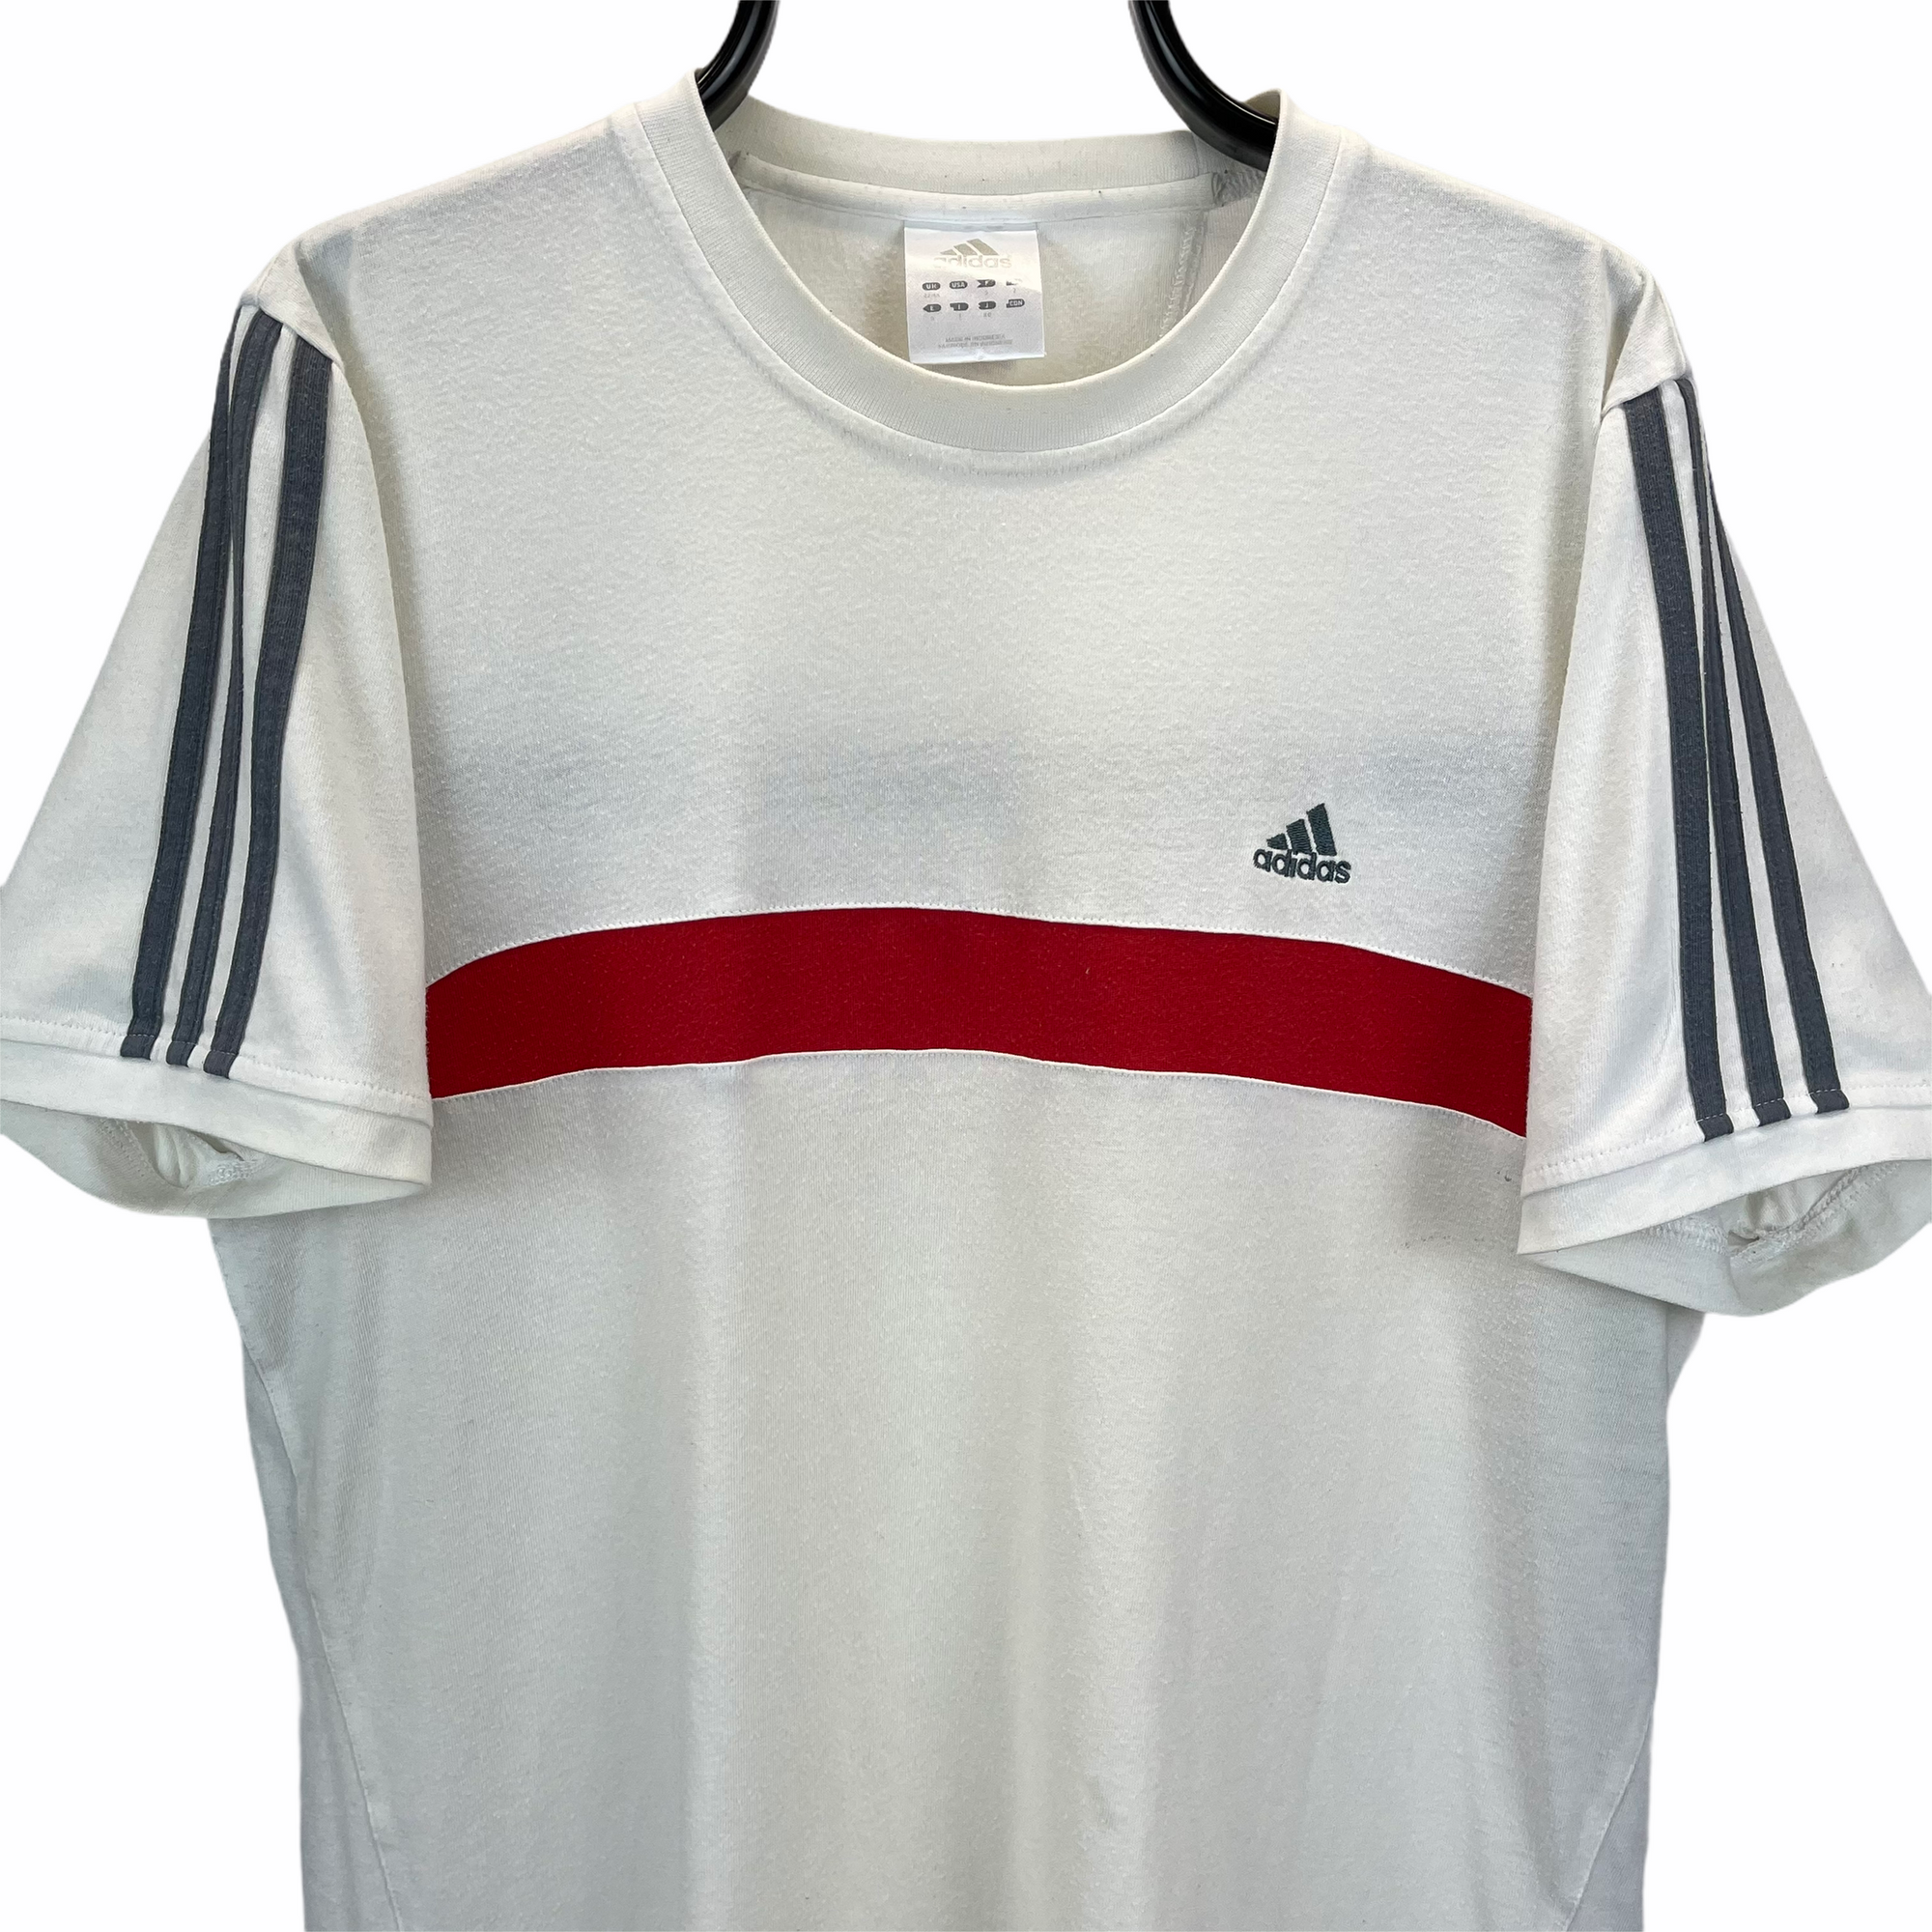 VINTAGE ADIDAS EMBROIDERED SMALL LOGO TEE IN WHITE, RED & GREY - MEN'S LARGE/WOMEN'S XL